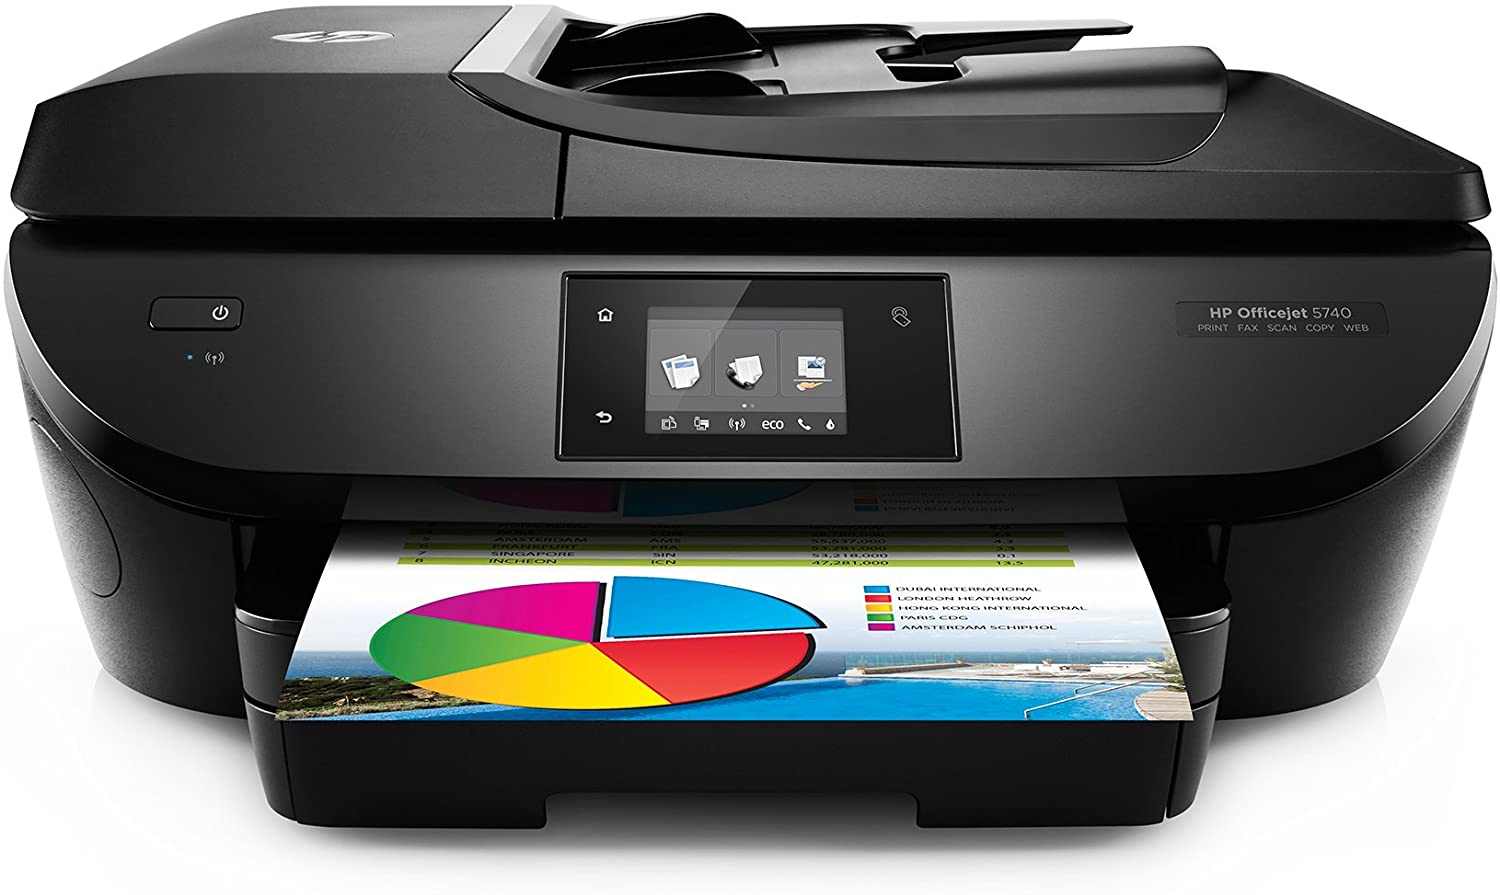 HP OfficeJet 5740 AllInOne Wireless Printer With Mobile Printing